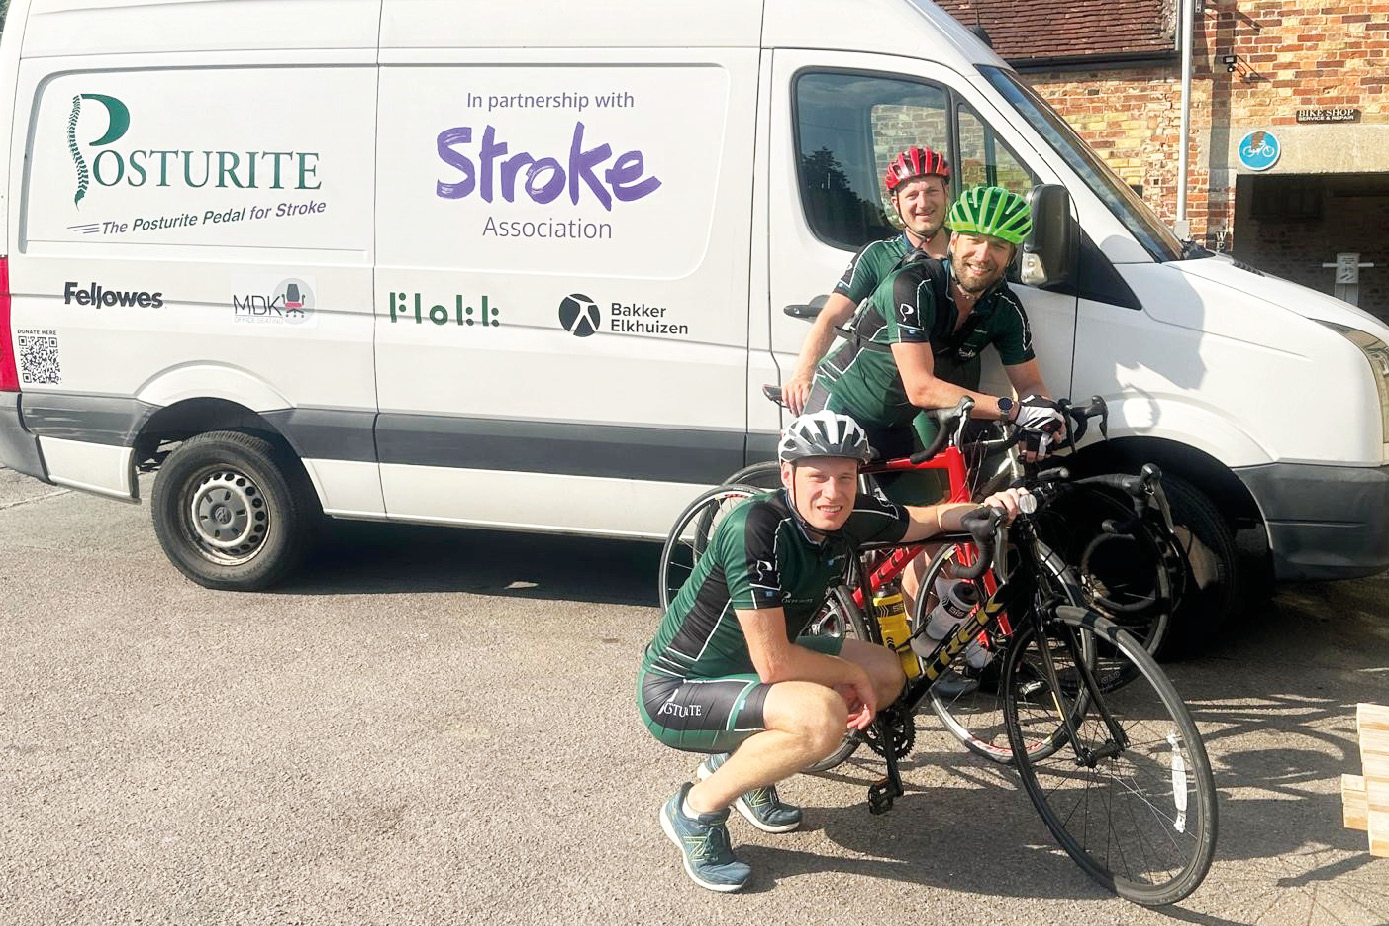 The Posturite Pedal for Stroke raised over £10,000